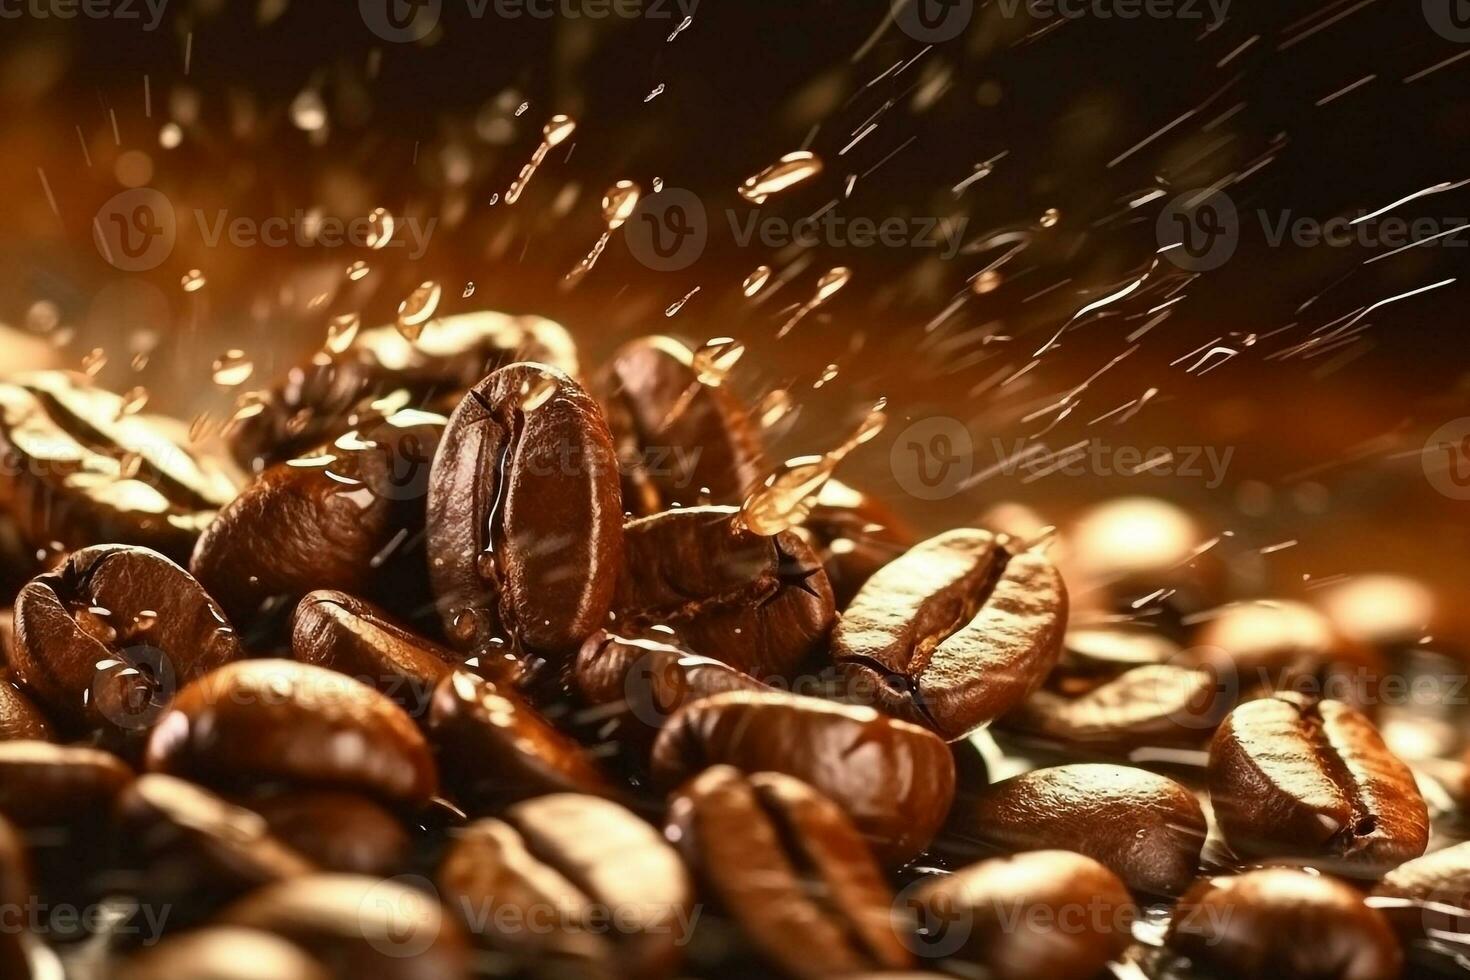 https://static.vecteezy.com/system/resources/previews/029/557/773/non_2x/closeup-of-coffee-beans-splashes-background-photo.jpg